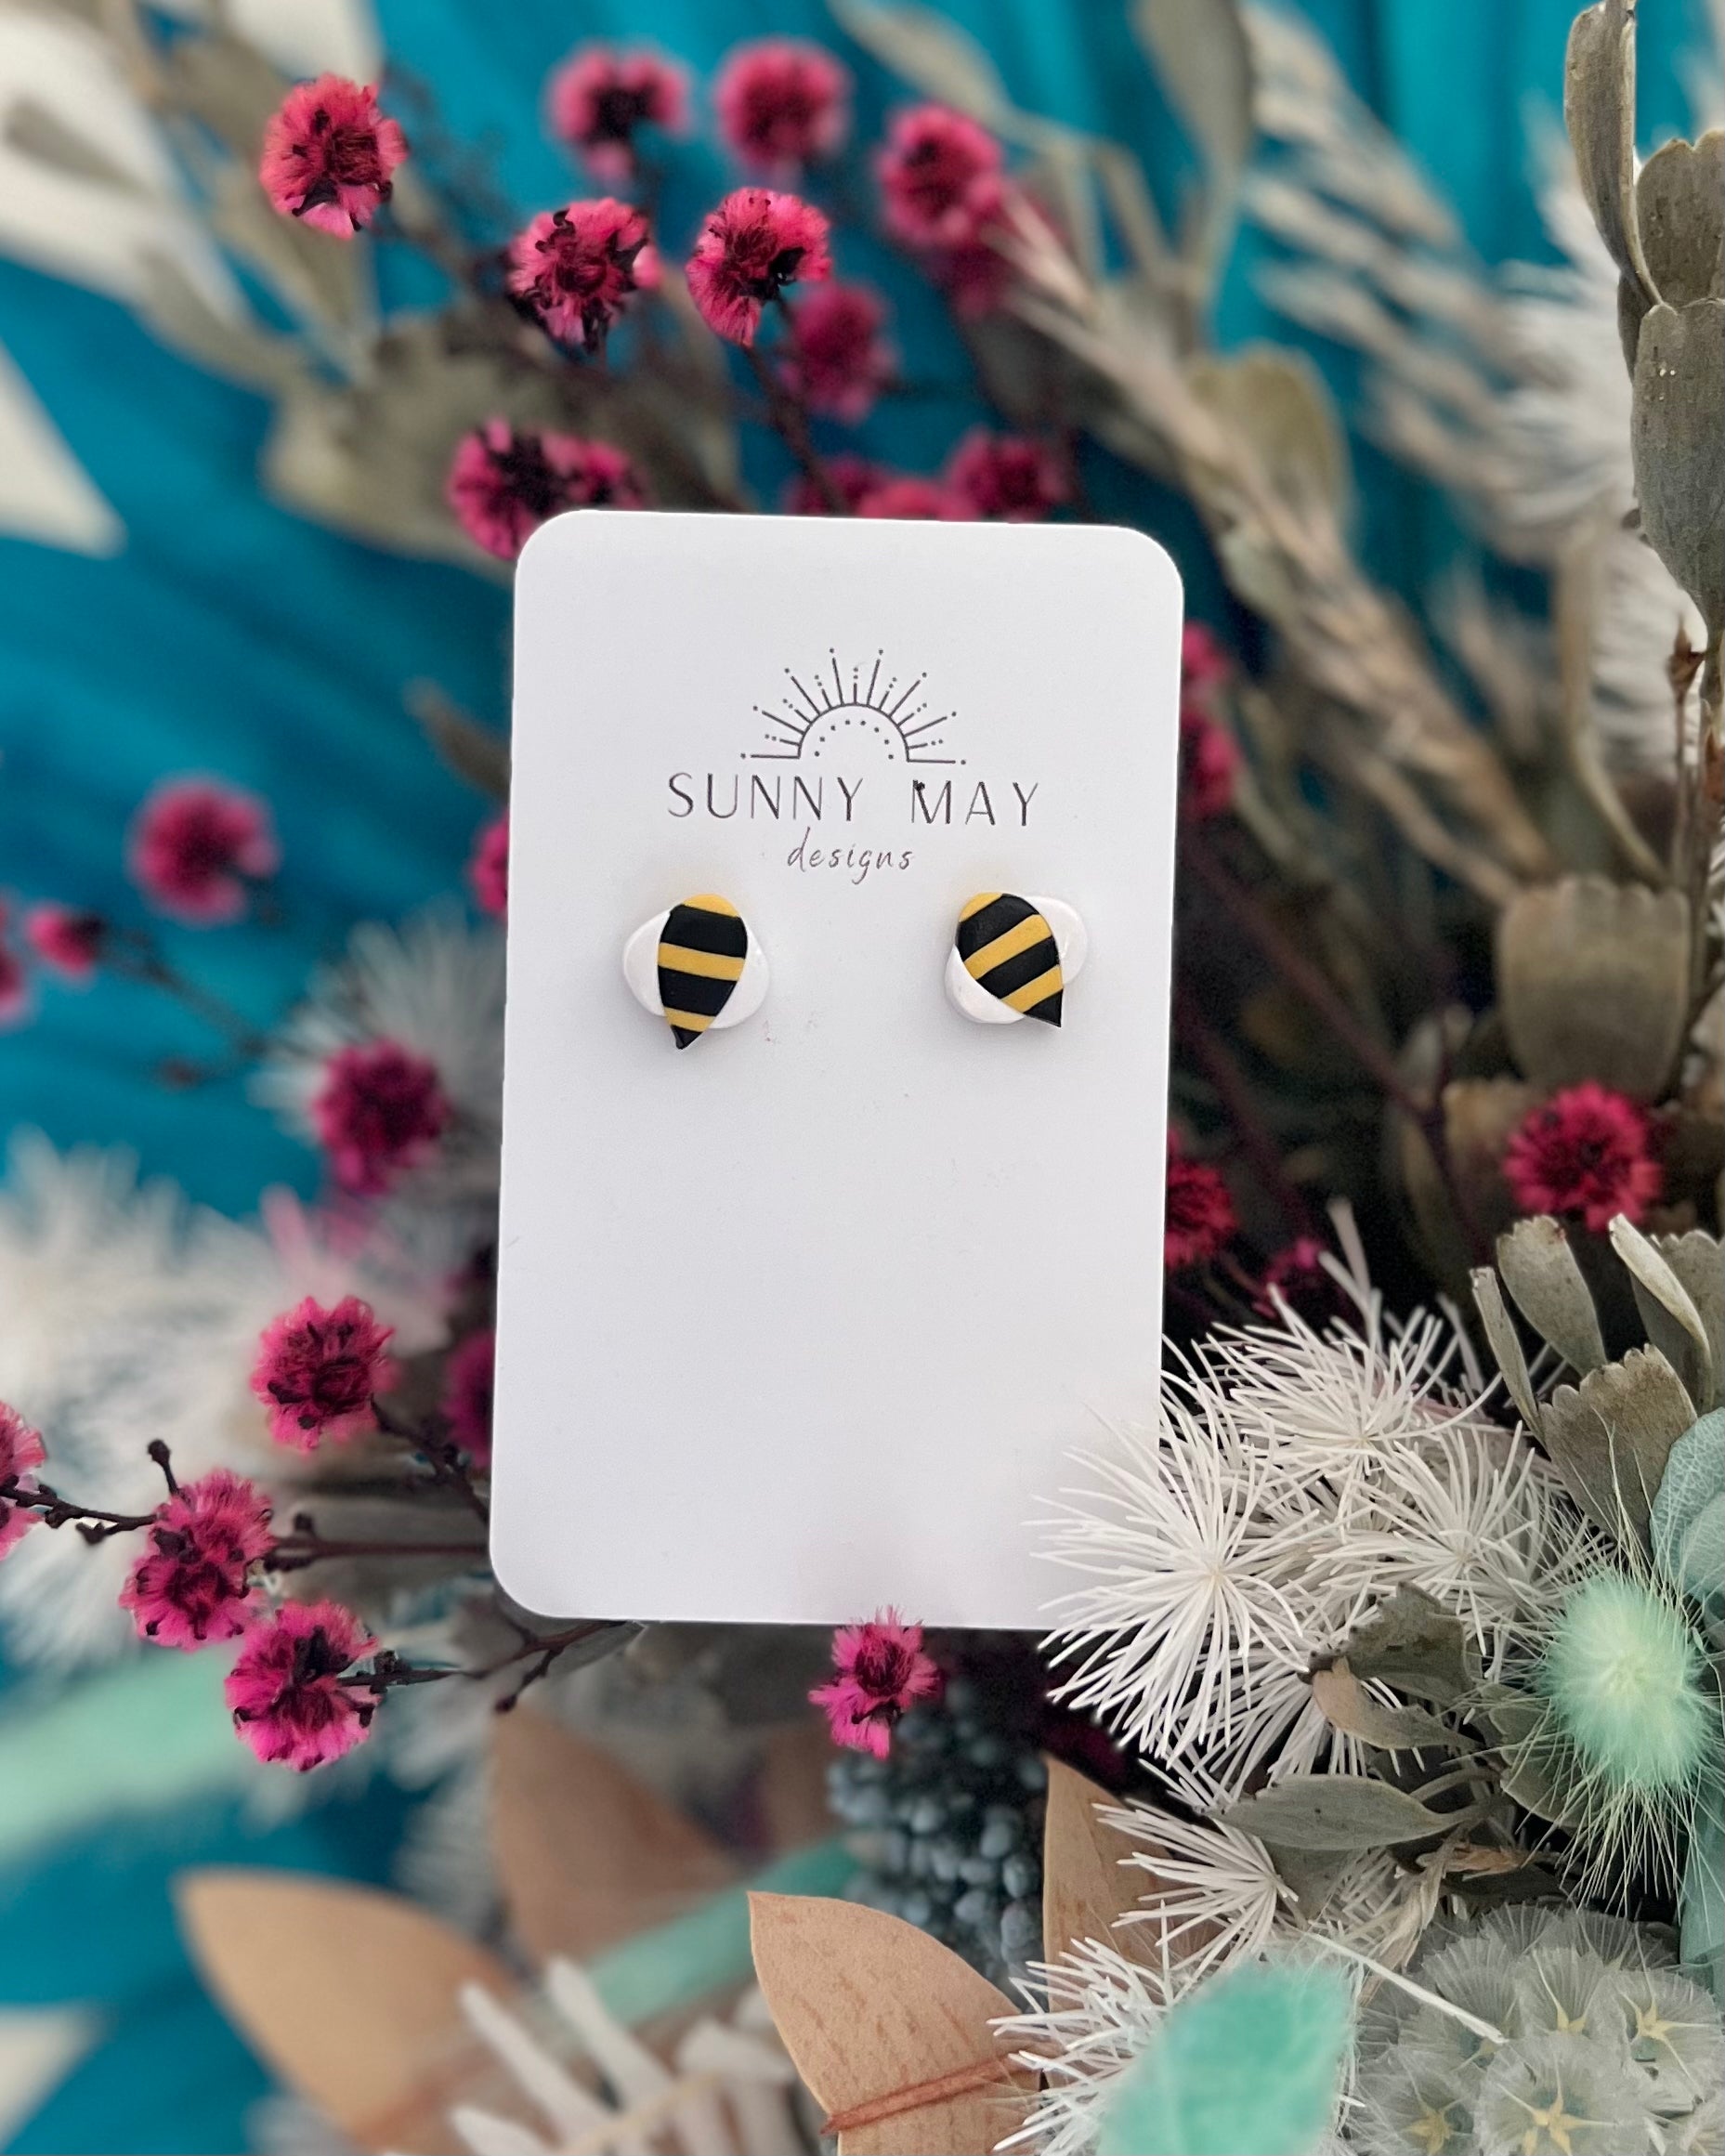 **NEW** Sunny May Earrings In The Garden: 
Spring is here! Each of these little critters are handmade in Perth WA by Sunny May Designs
Findings are surgical steel, with posts secured using resin for incredib - Ciao Bella Dresses